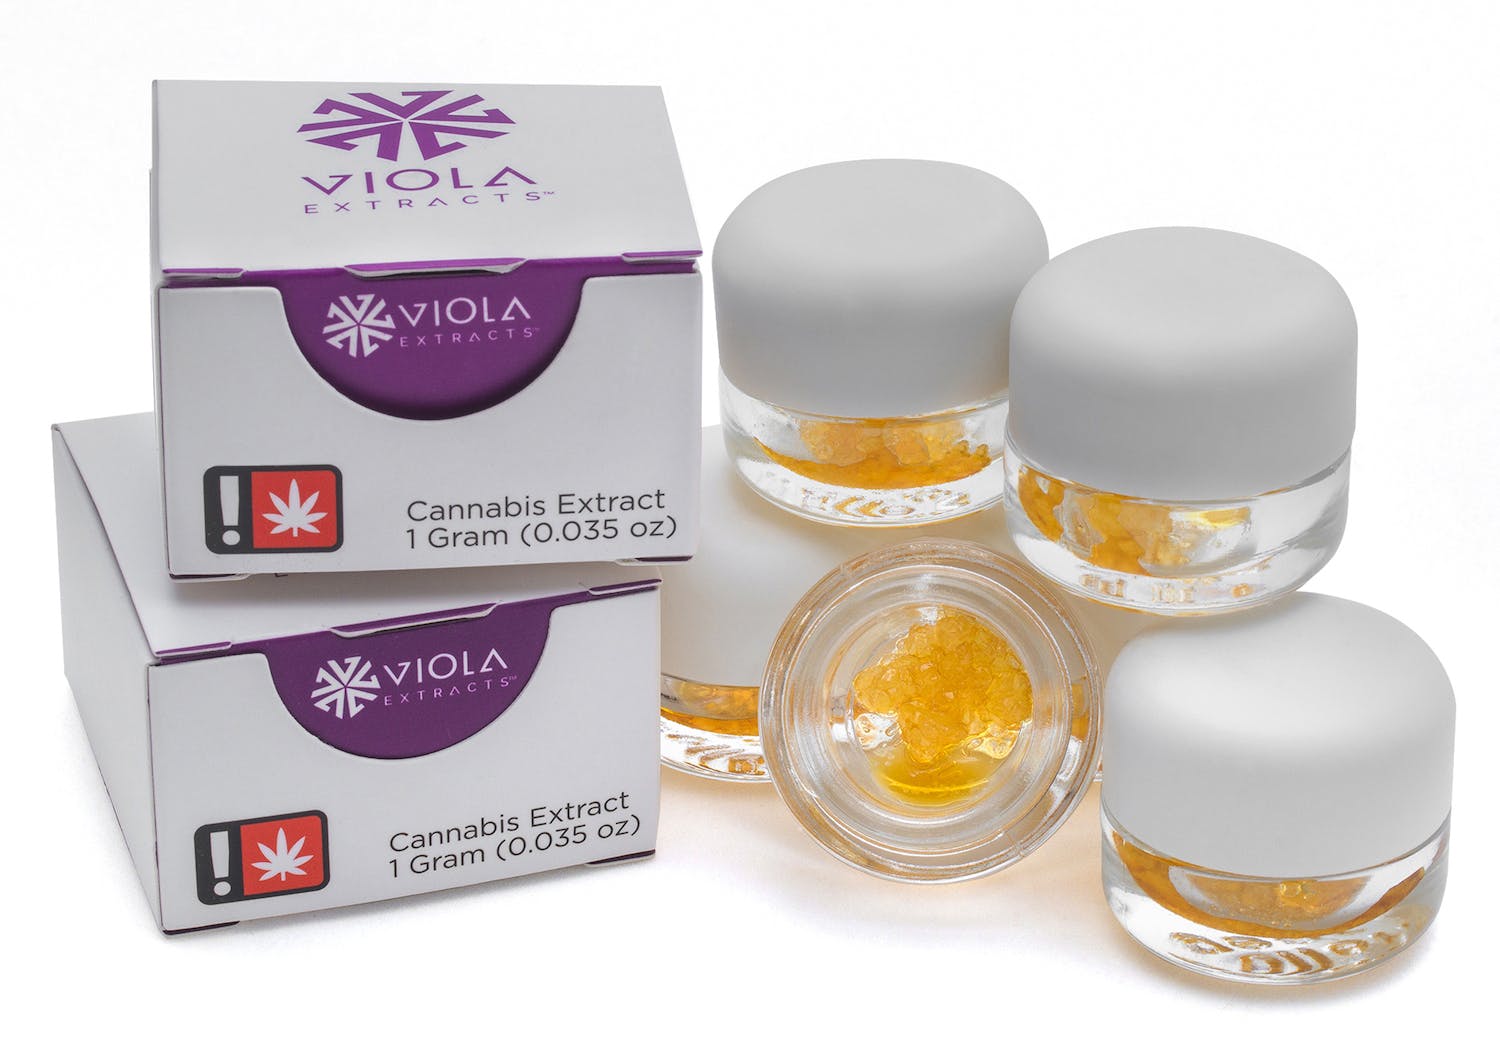 concentrate-viola-extracts-crockett-dawg-live-resin-230615